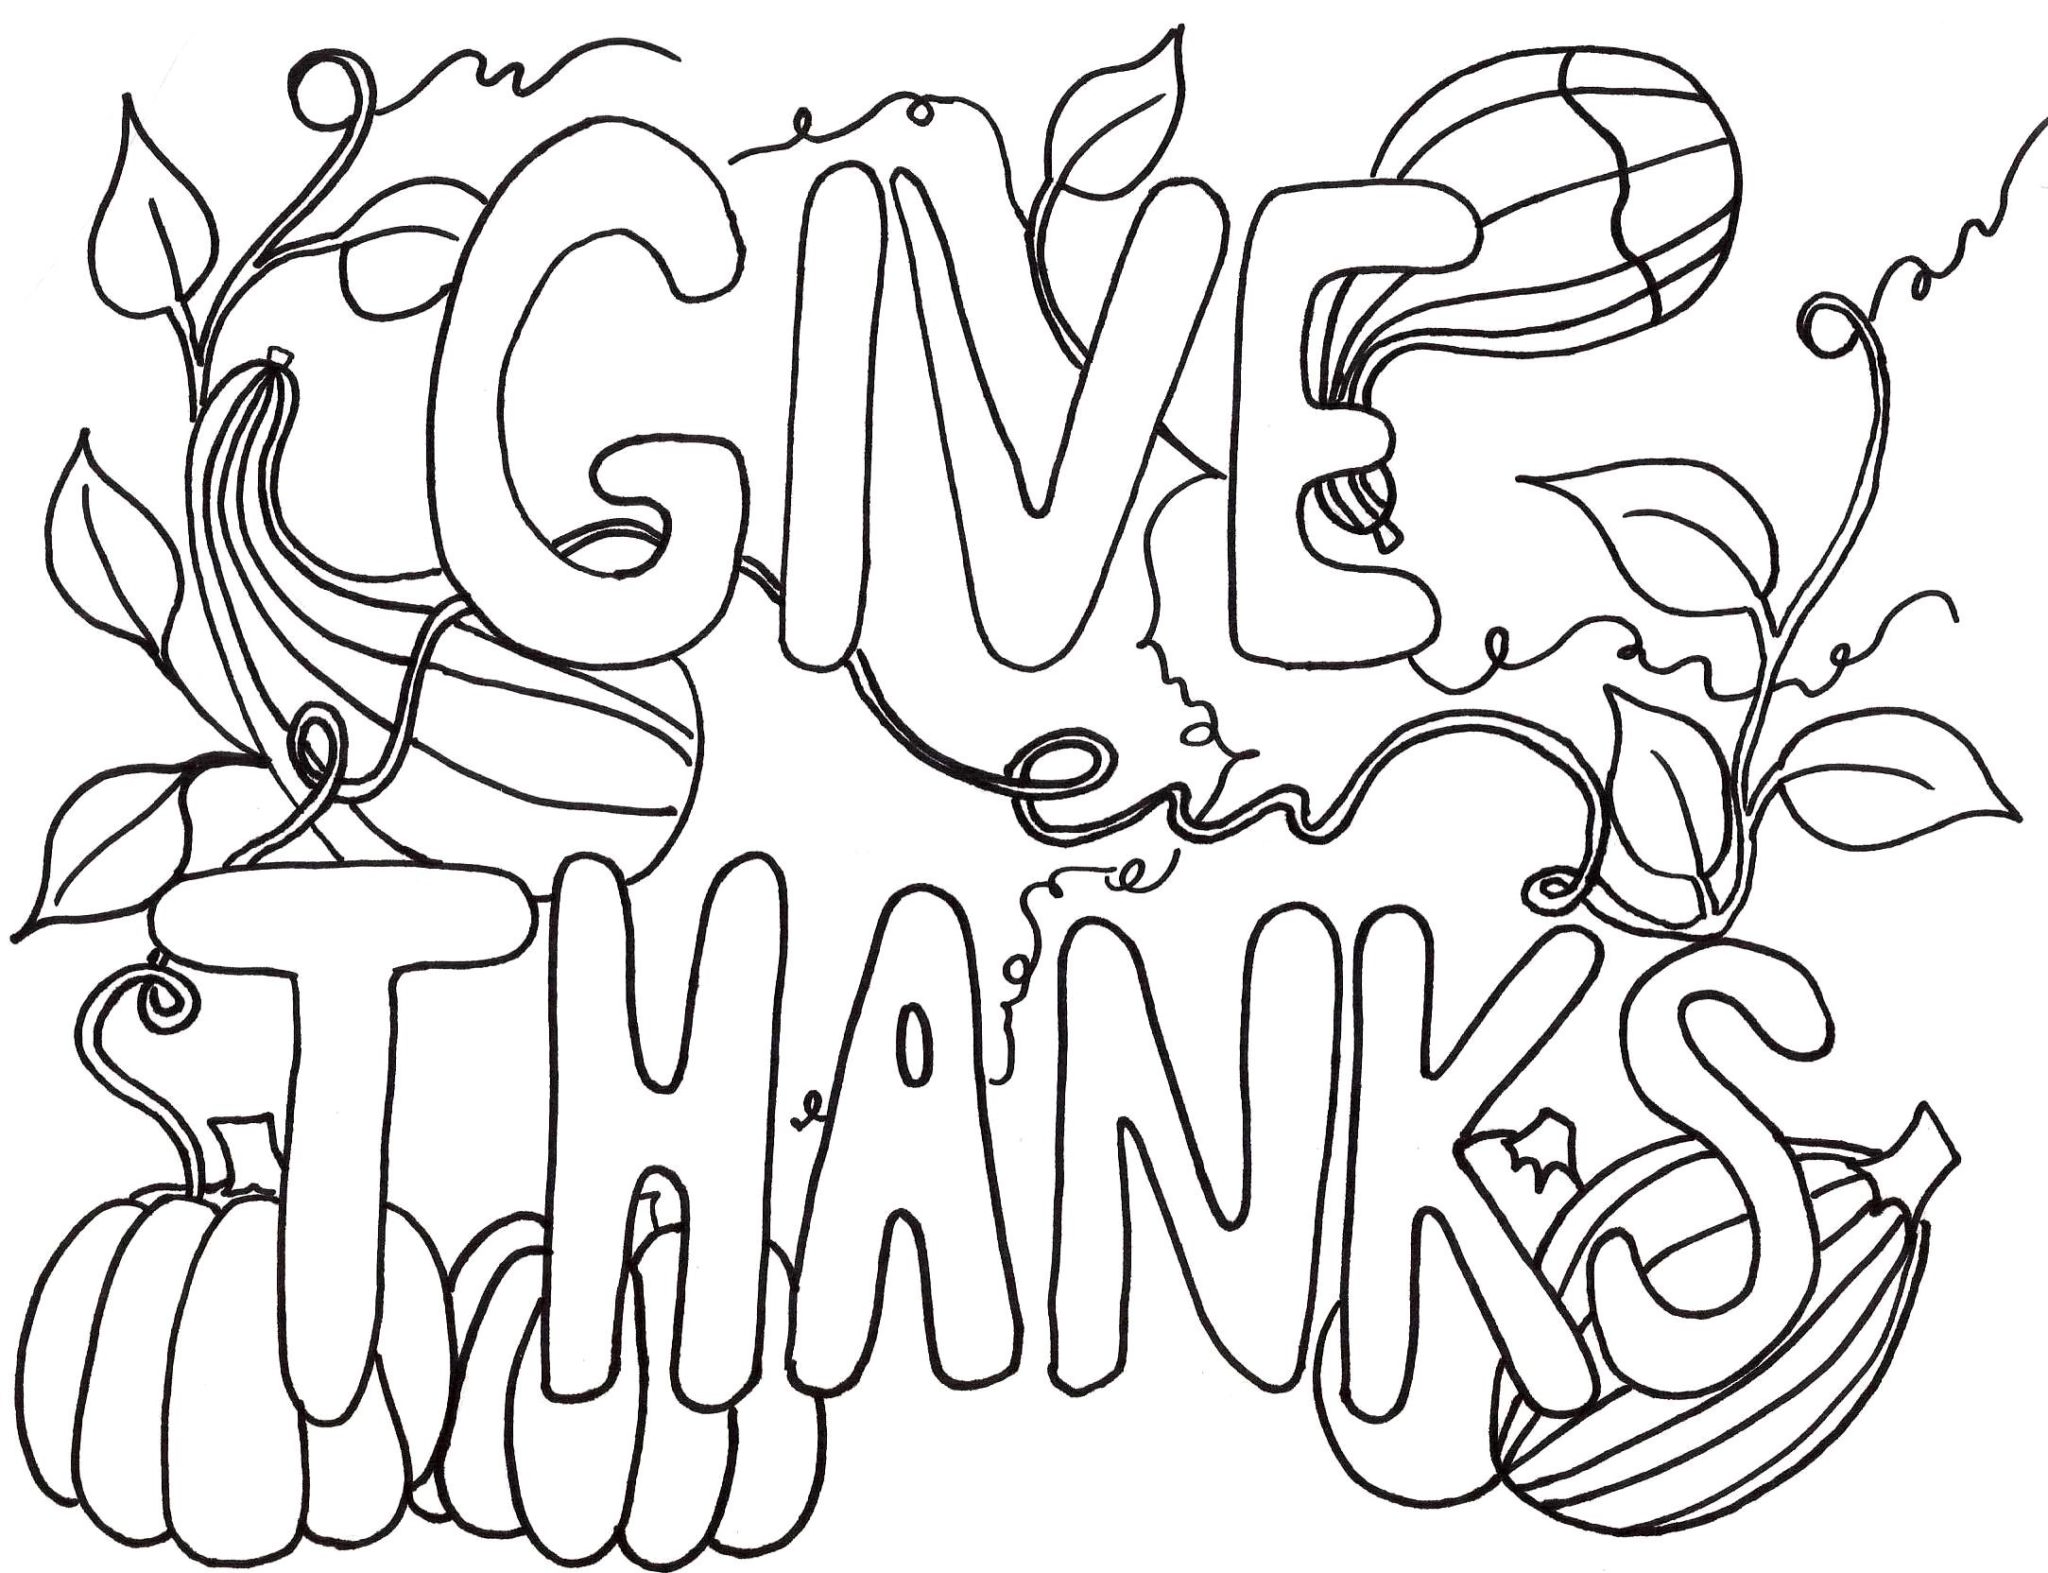 thanksgiving-coloring-pages-for-adults-best-coloring-pages-for-kids